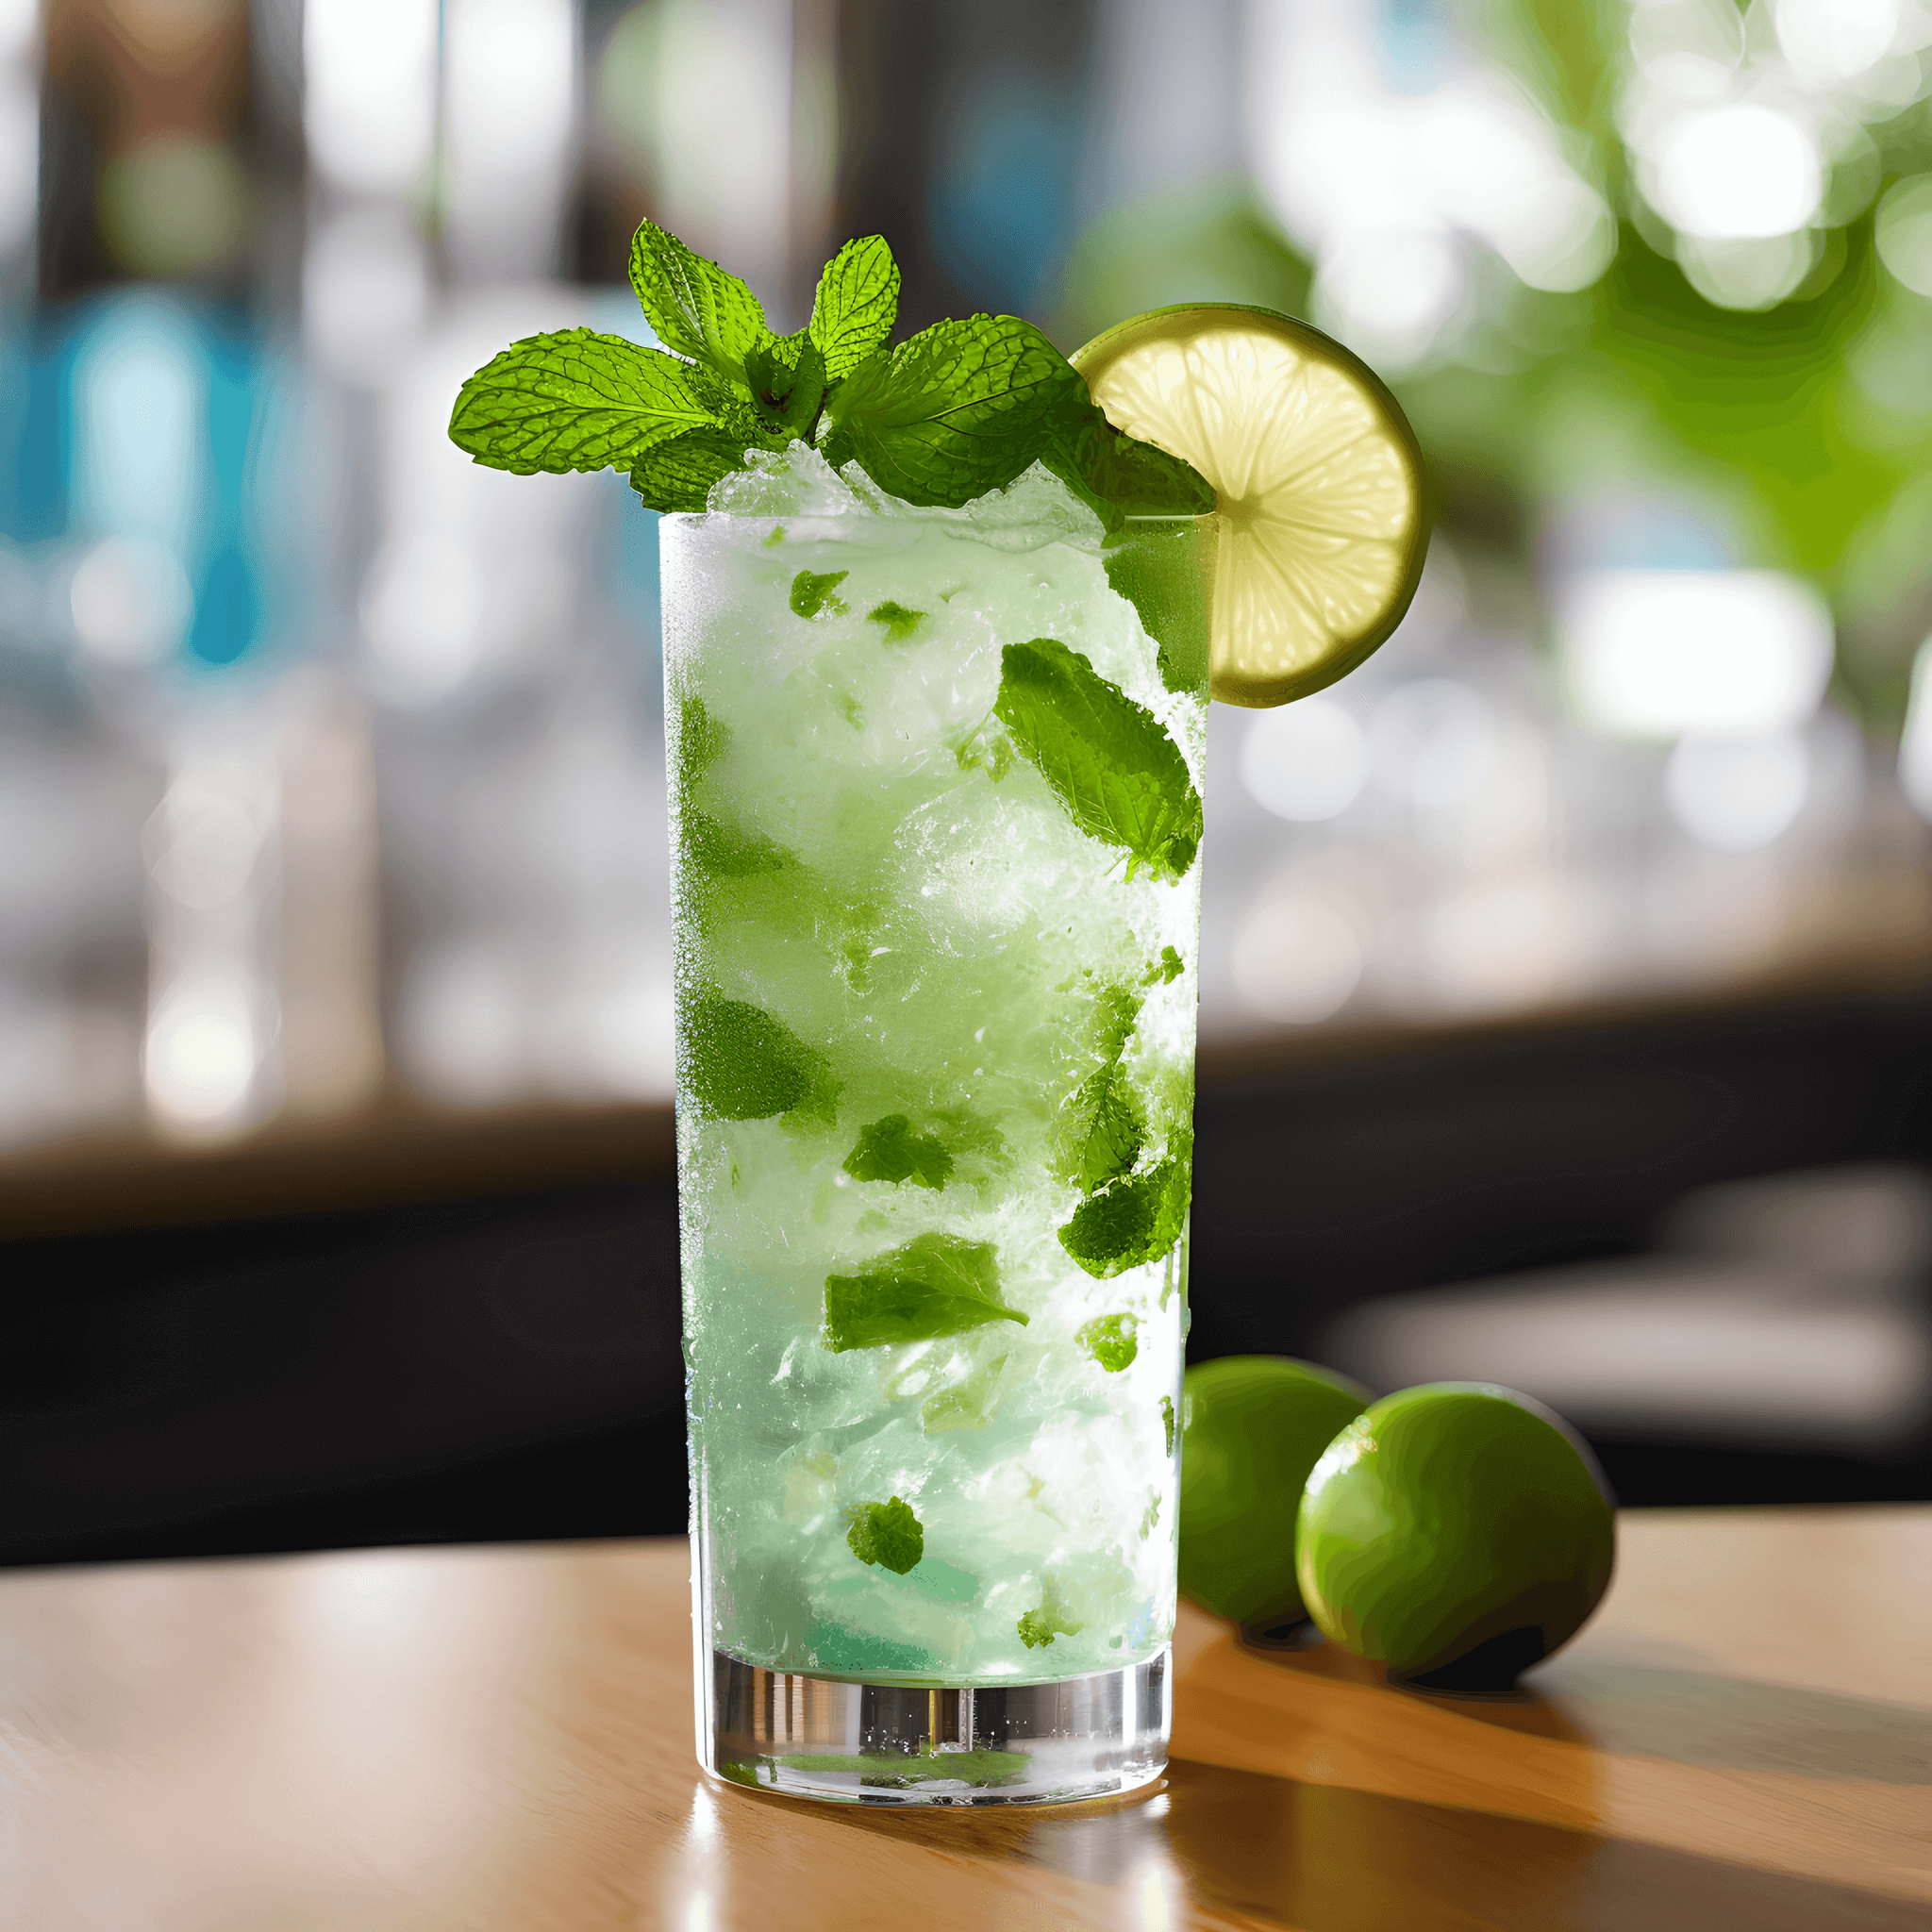 The Mojito is a refreshing, sweet, and slightly sour cocktail with a hint of mint and a subtle rum kick. It is a well-balanced drink that is both invigorating and easy to sip.